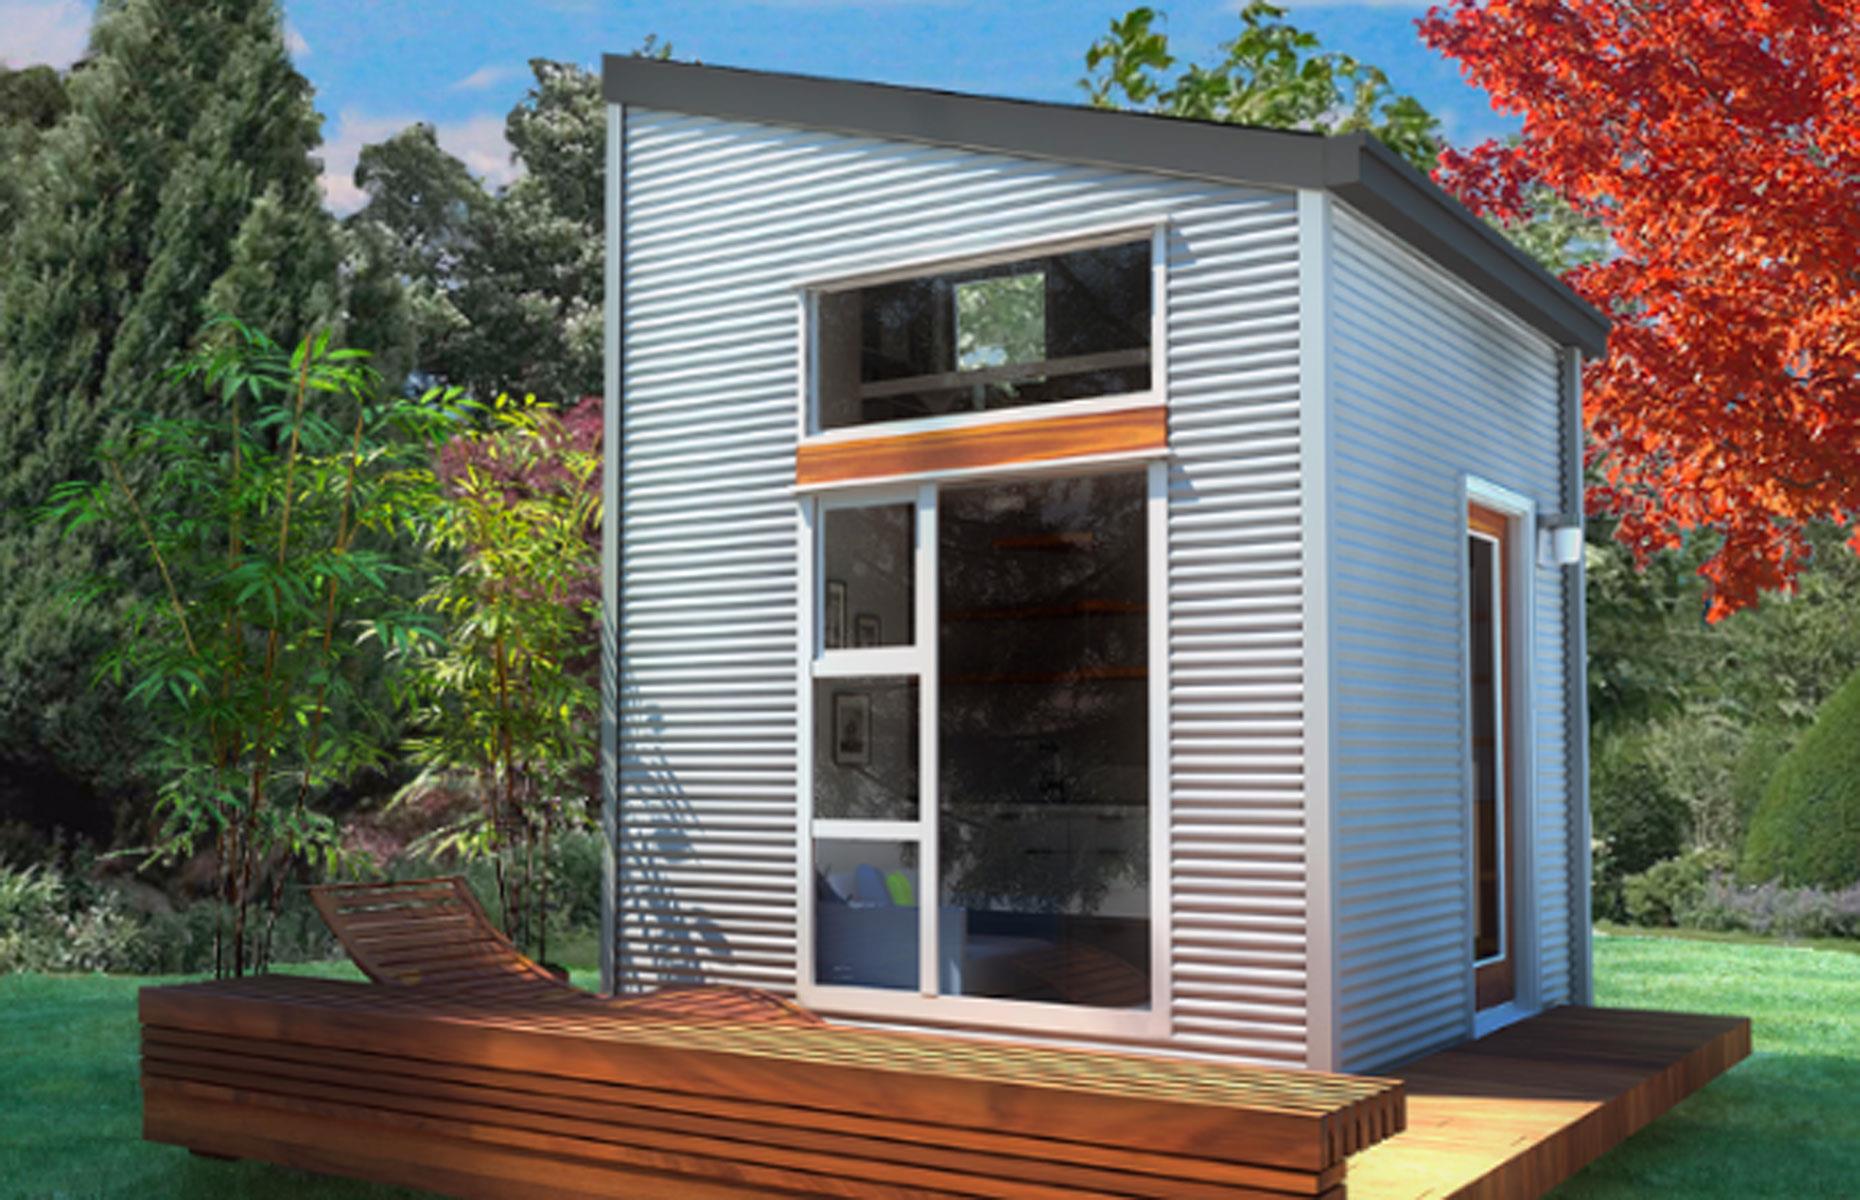 Nomad Live micro house: $28,000 (£19k)